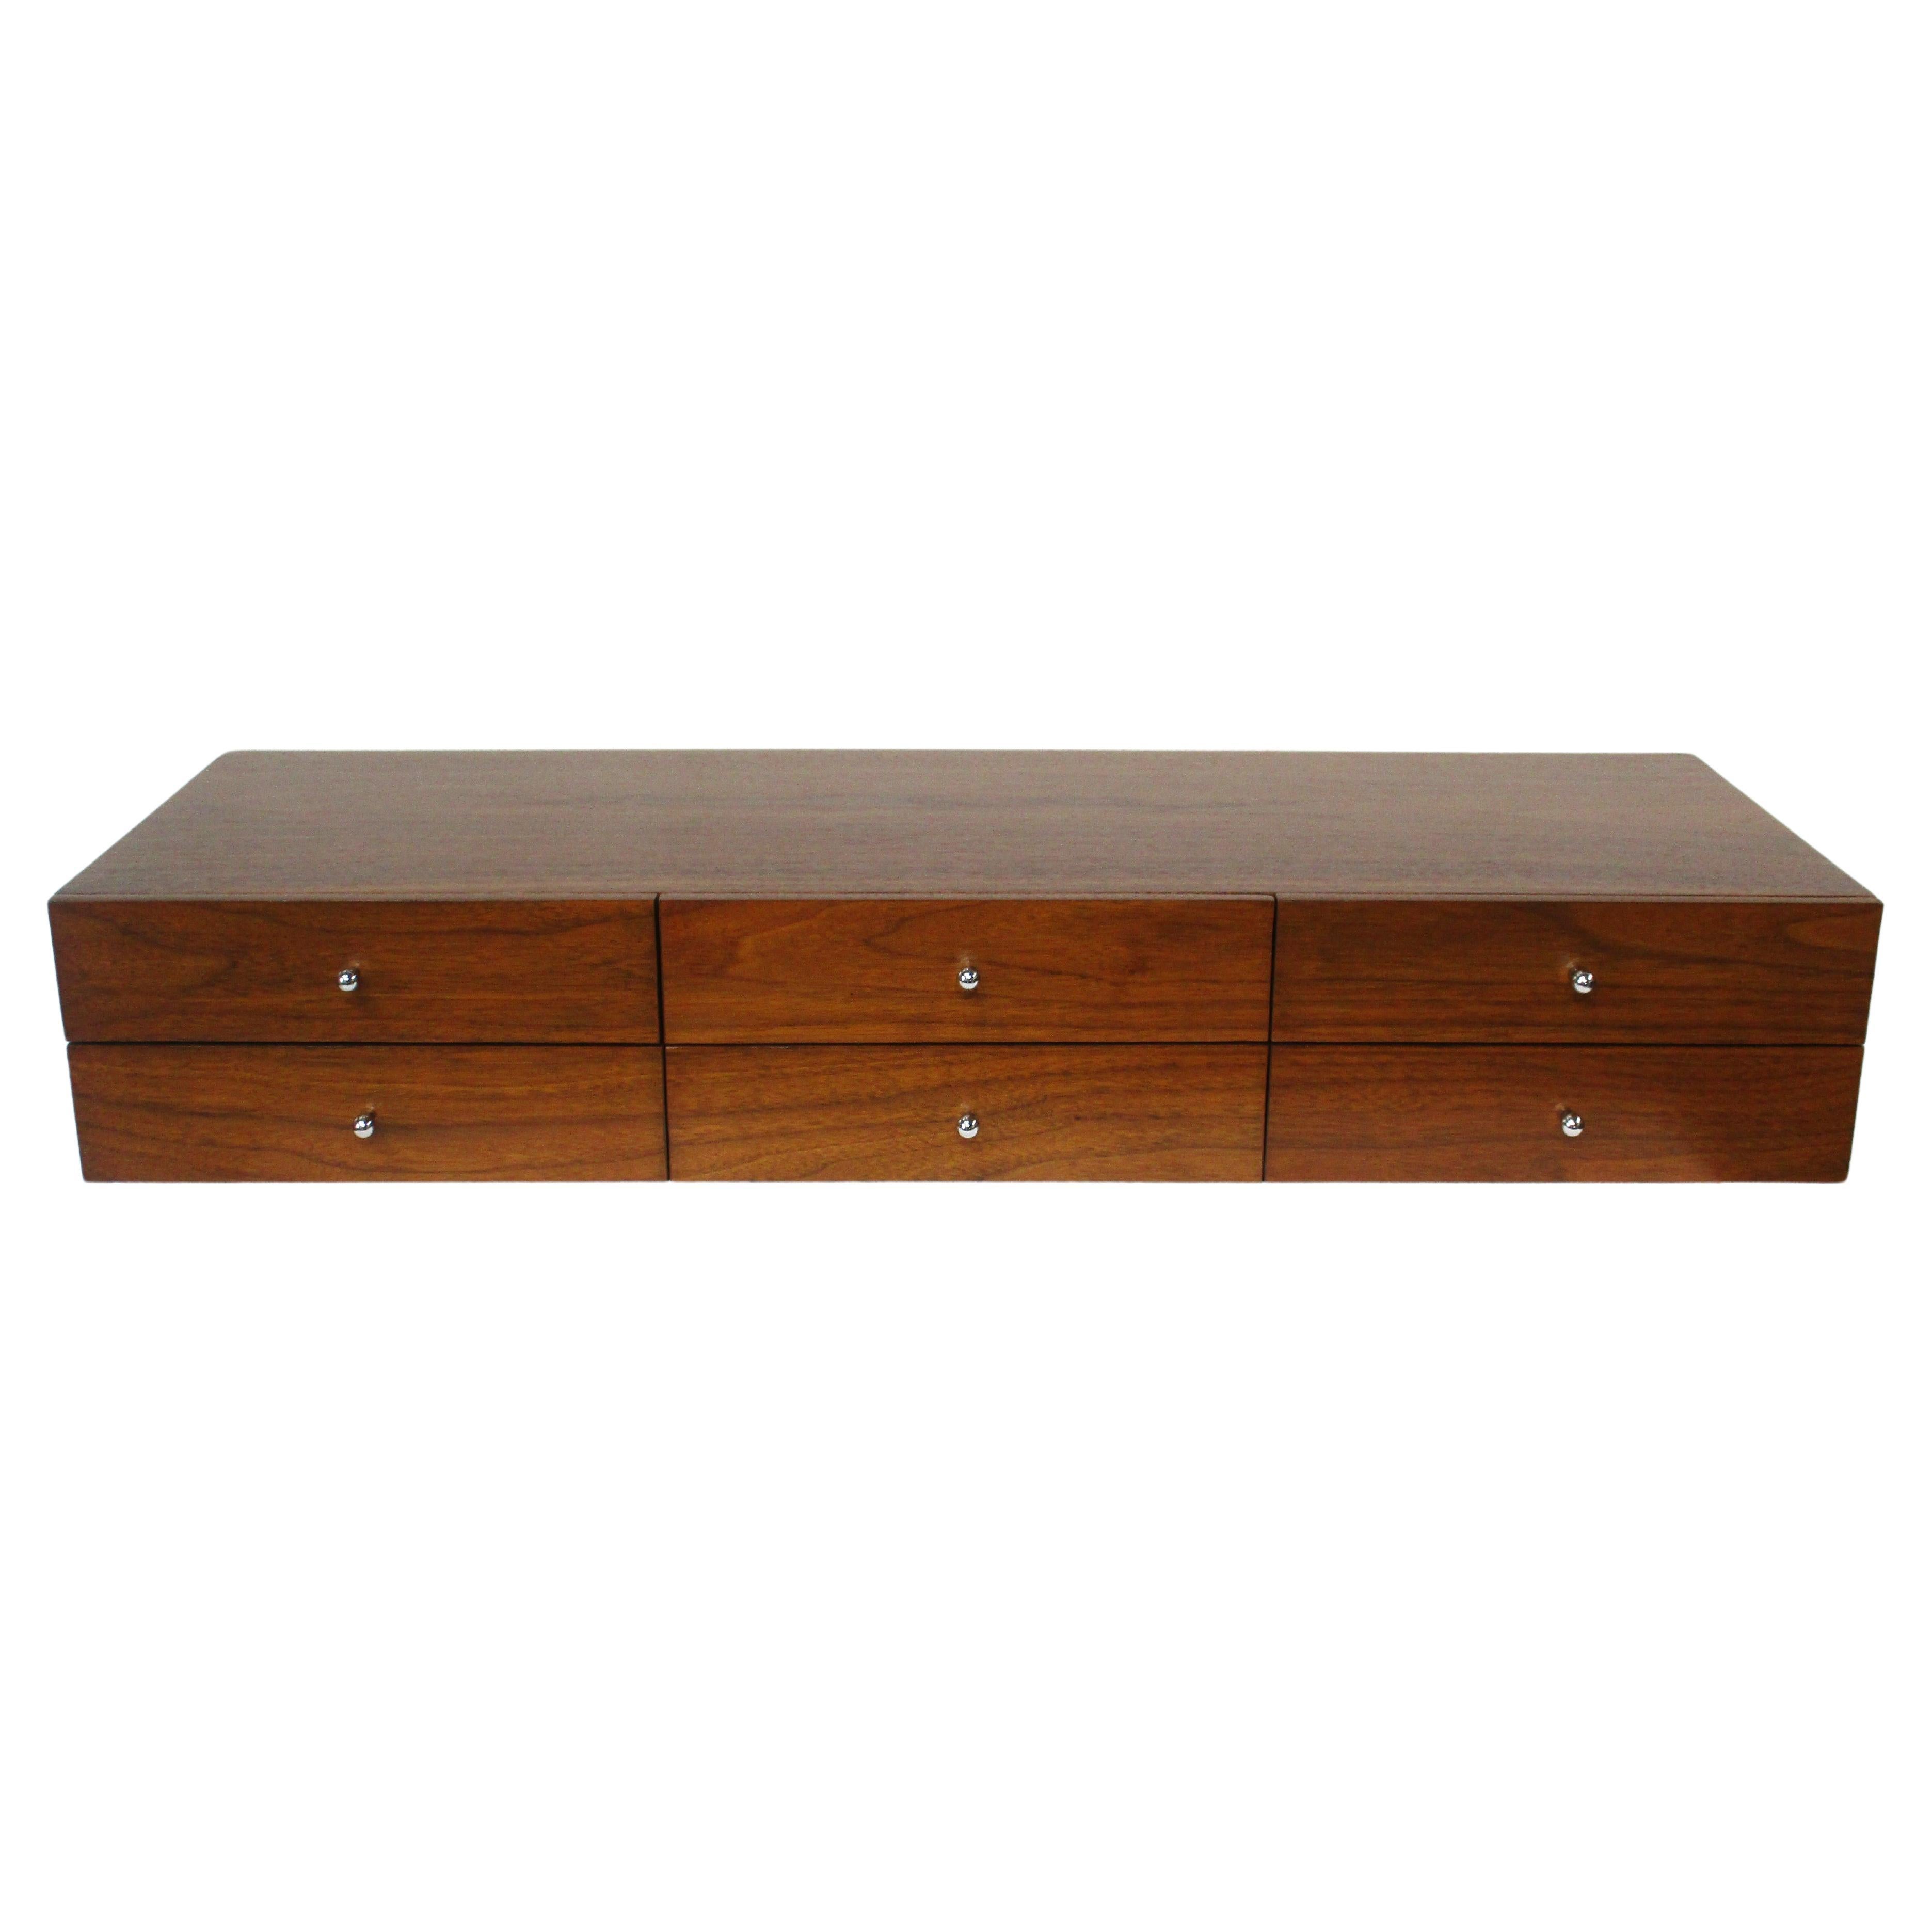 A very nice six drawer jewelry / watch box with sculptural chromed tear drop styled pulls . Crafted in beautiful well grained walnut including the backside with book matched front drawers by H. Sacks &  Sons from their Connoisseur Collection . One